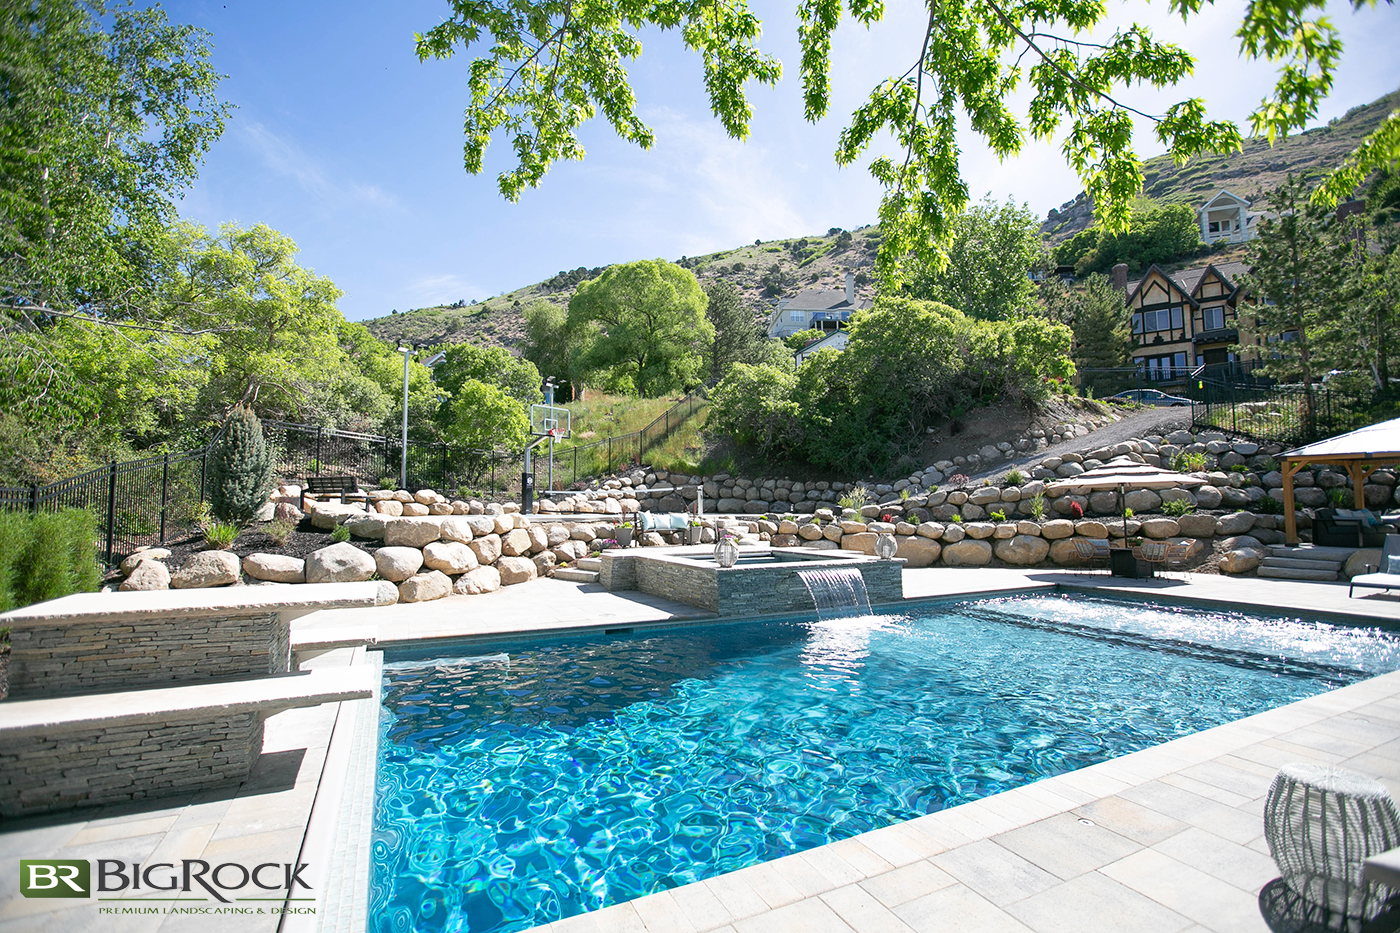 So you want to build a pool in Utah? We’re here with the answers to all your pool design questions as well as your pool installation questions.